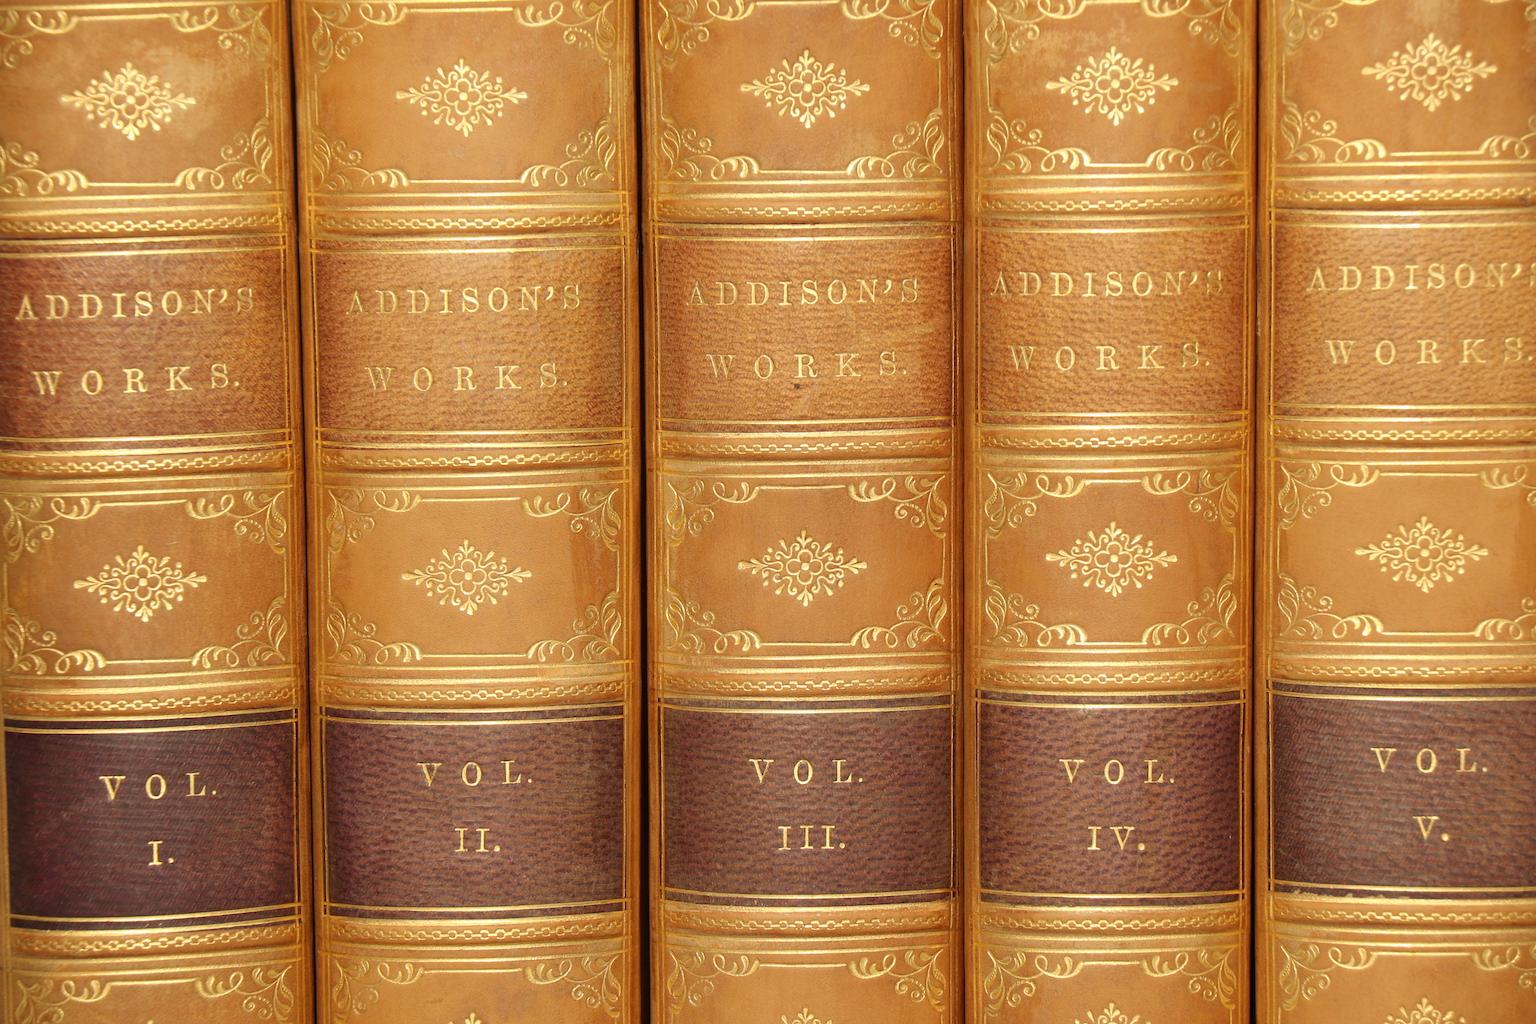 Leather bound. Six volumes. Octavo. Bound in tree quarter tan calf with marbled edges, raised bands, & gilt panels. Very good. Published in Philadelphia by J.B. Lippincott & Co. in 1867.

All listed dimensions are for a single